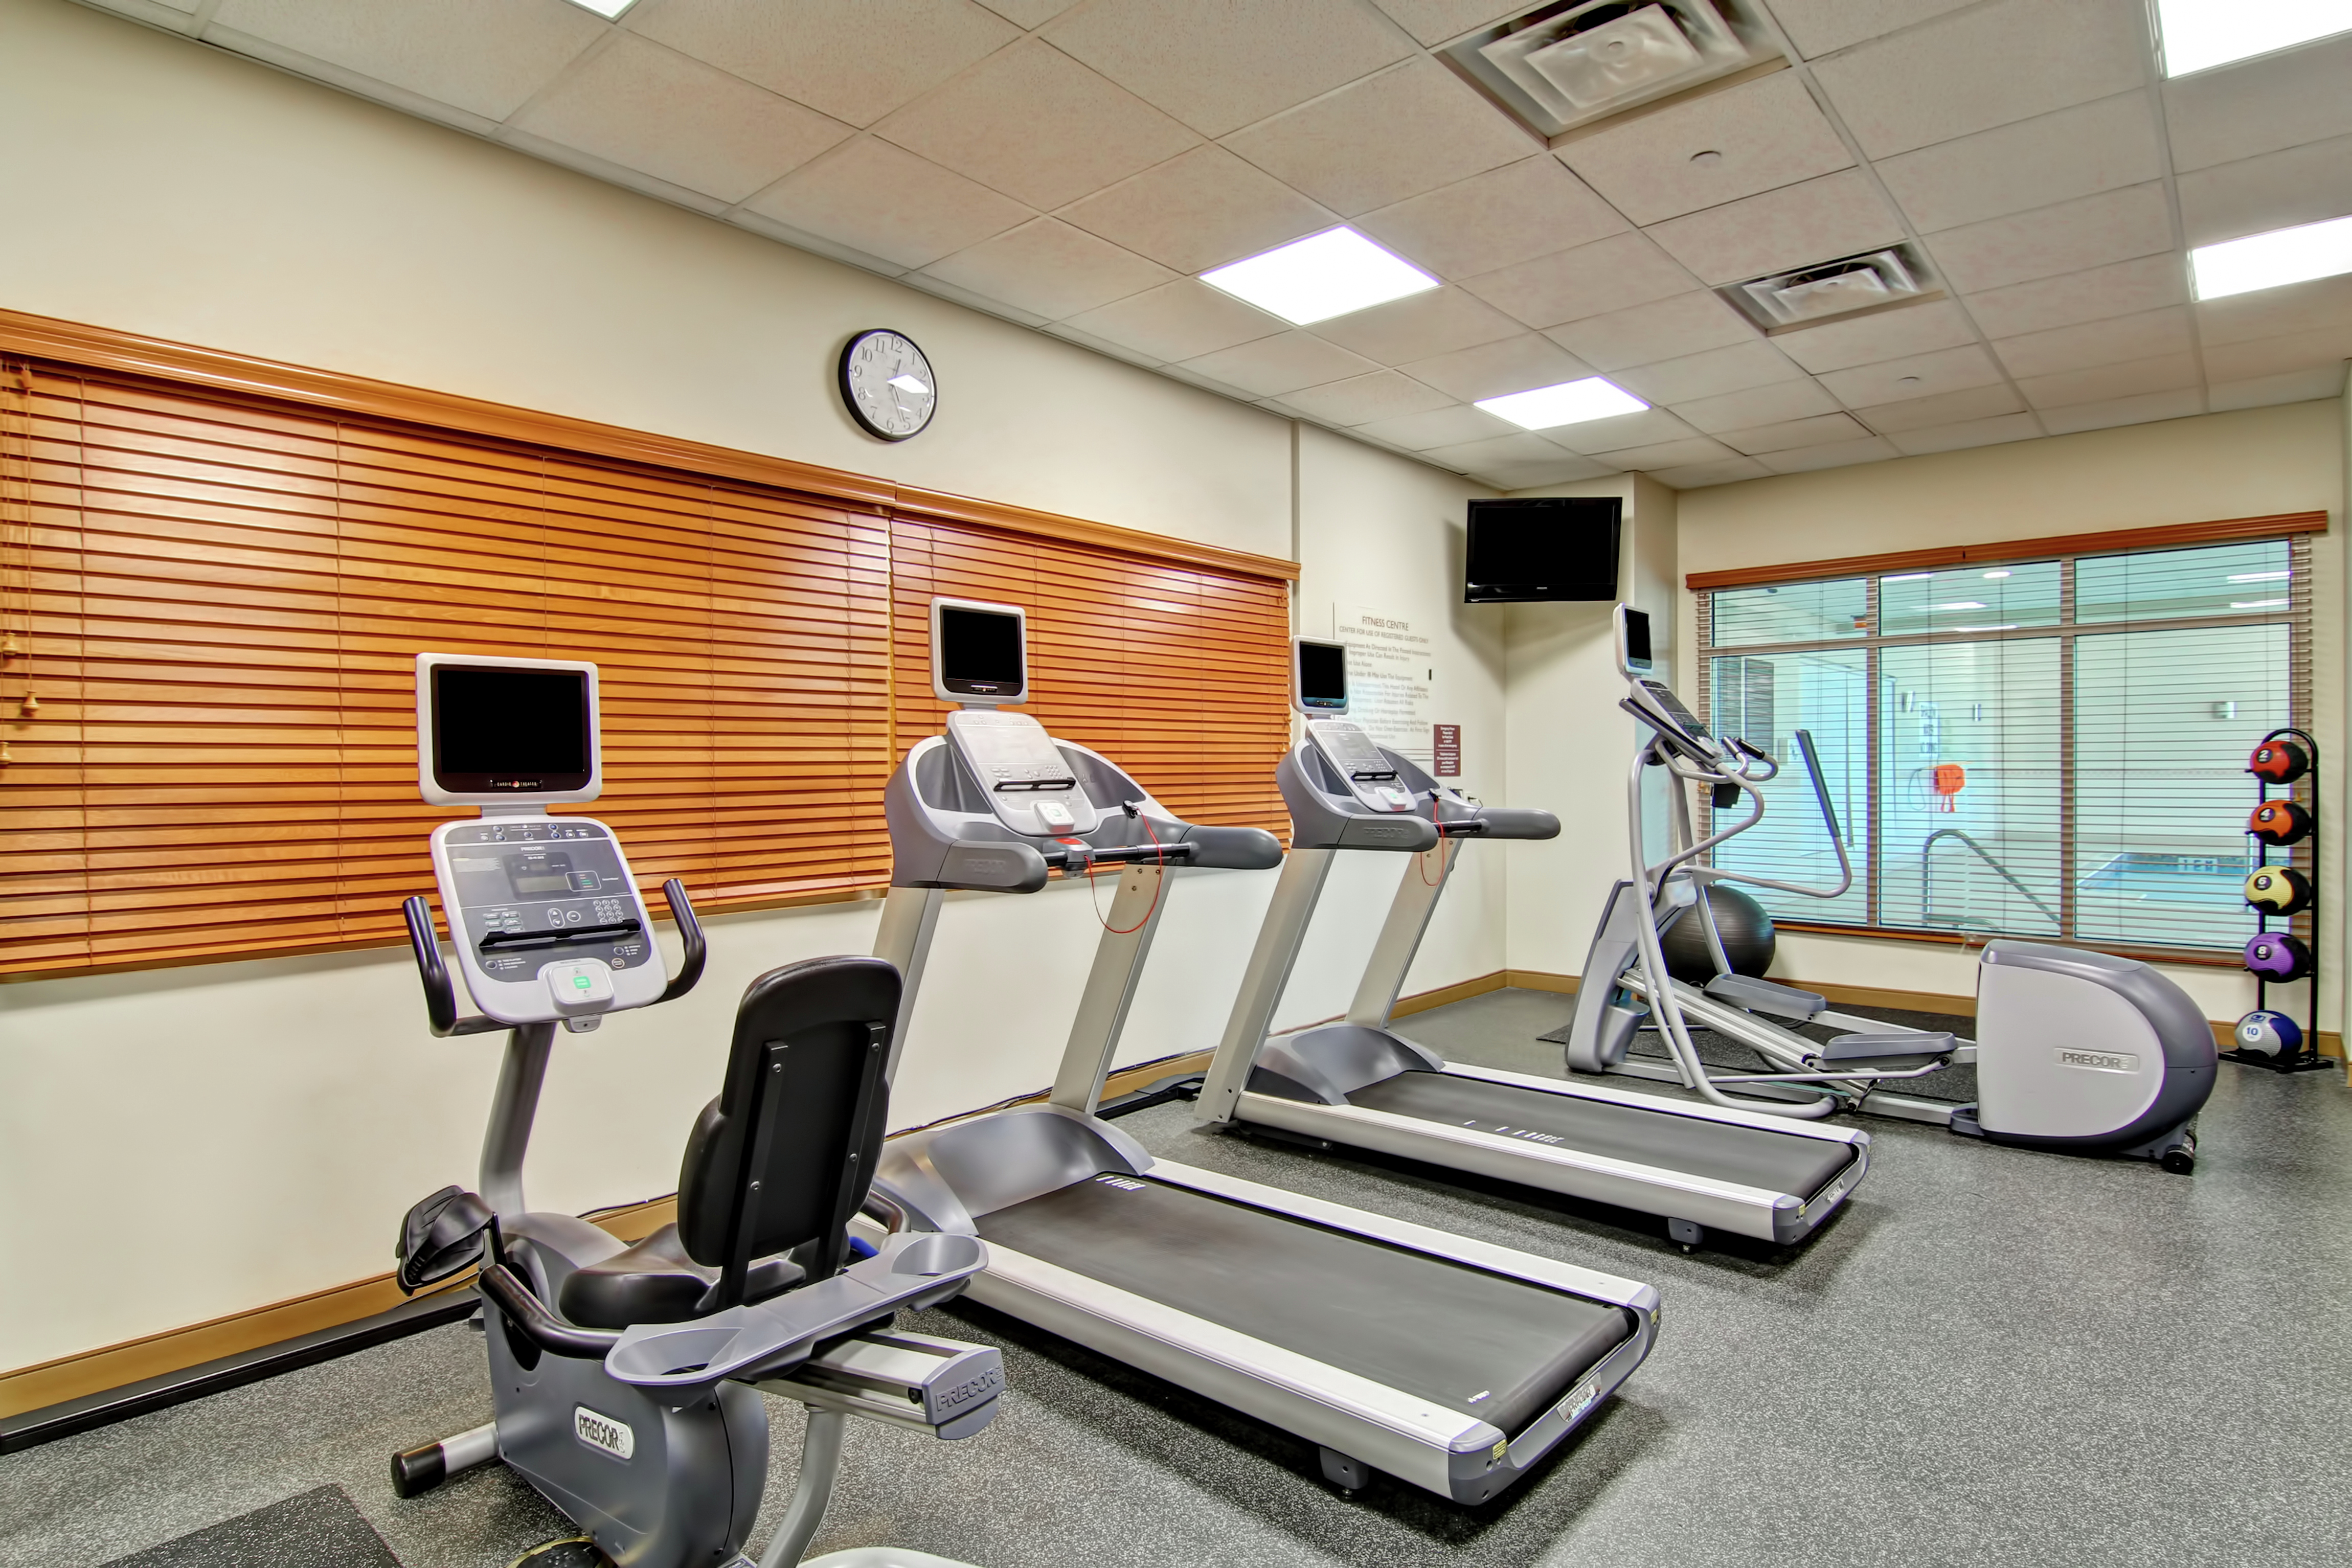 Fitness Center With Cardio Equipment, TV, Stability Ball, and Weight Balls by Window With View of Pool